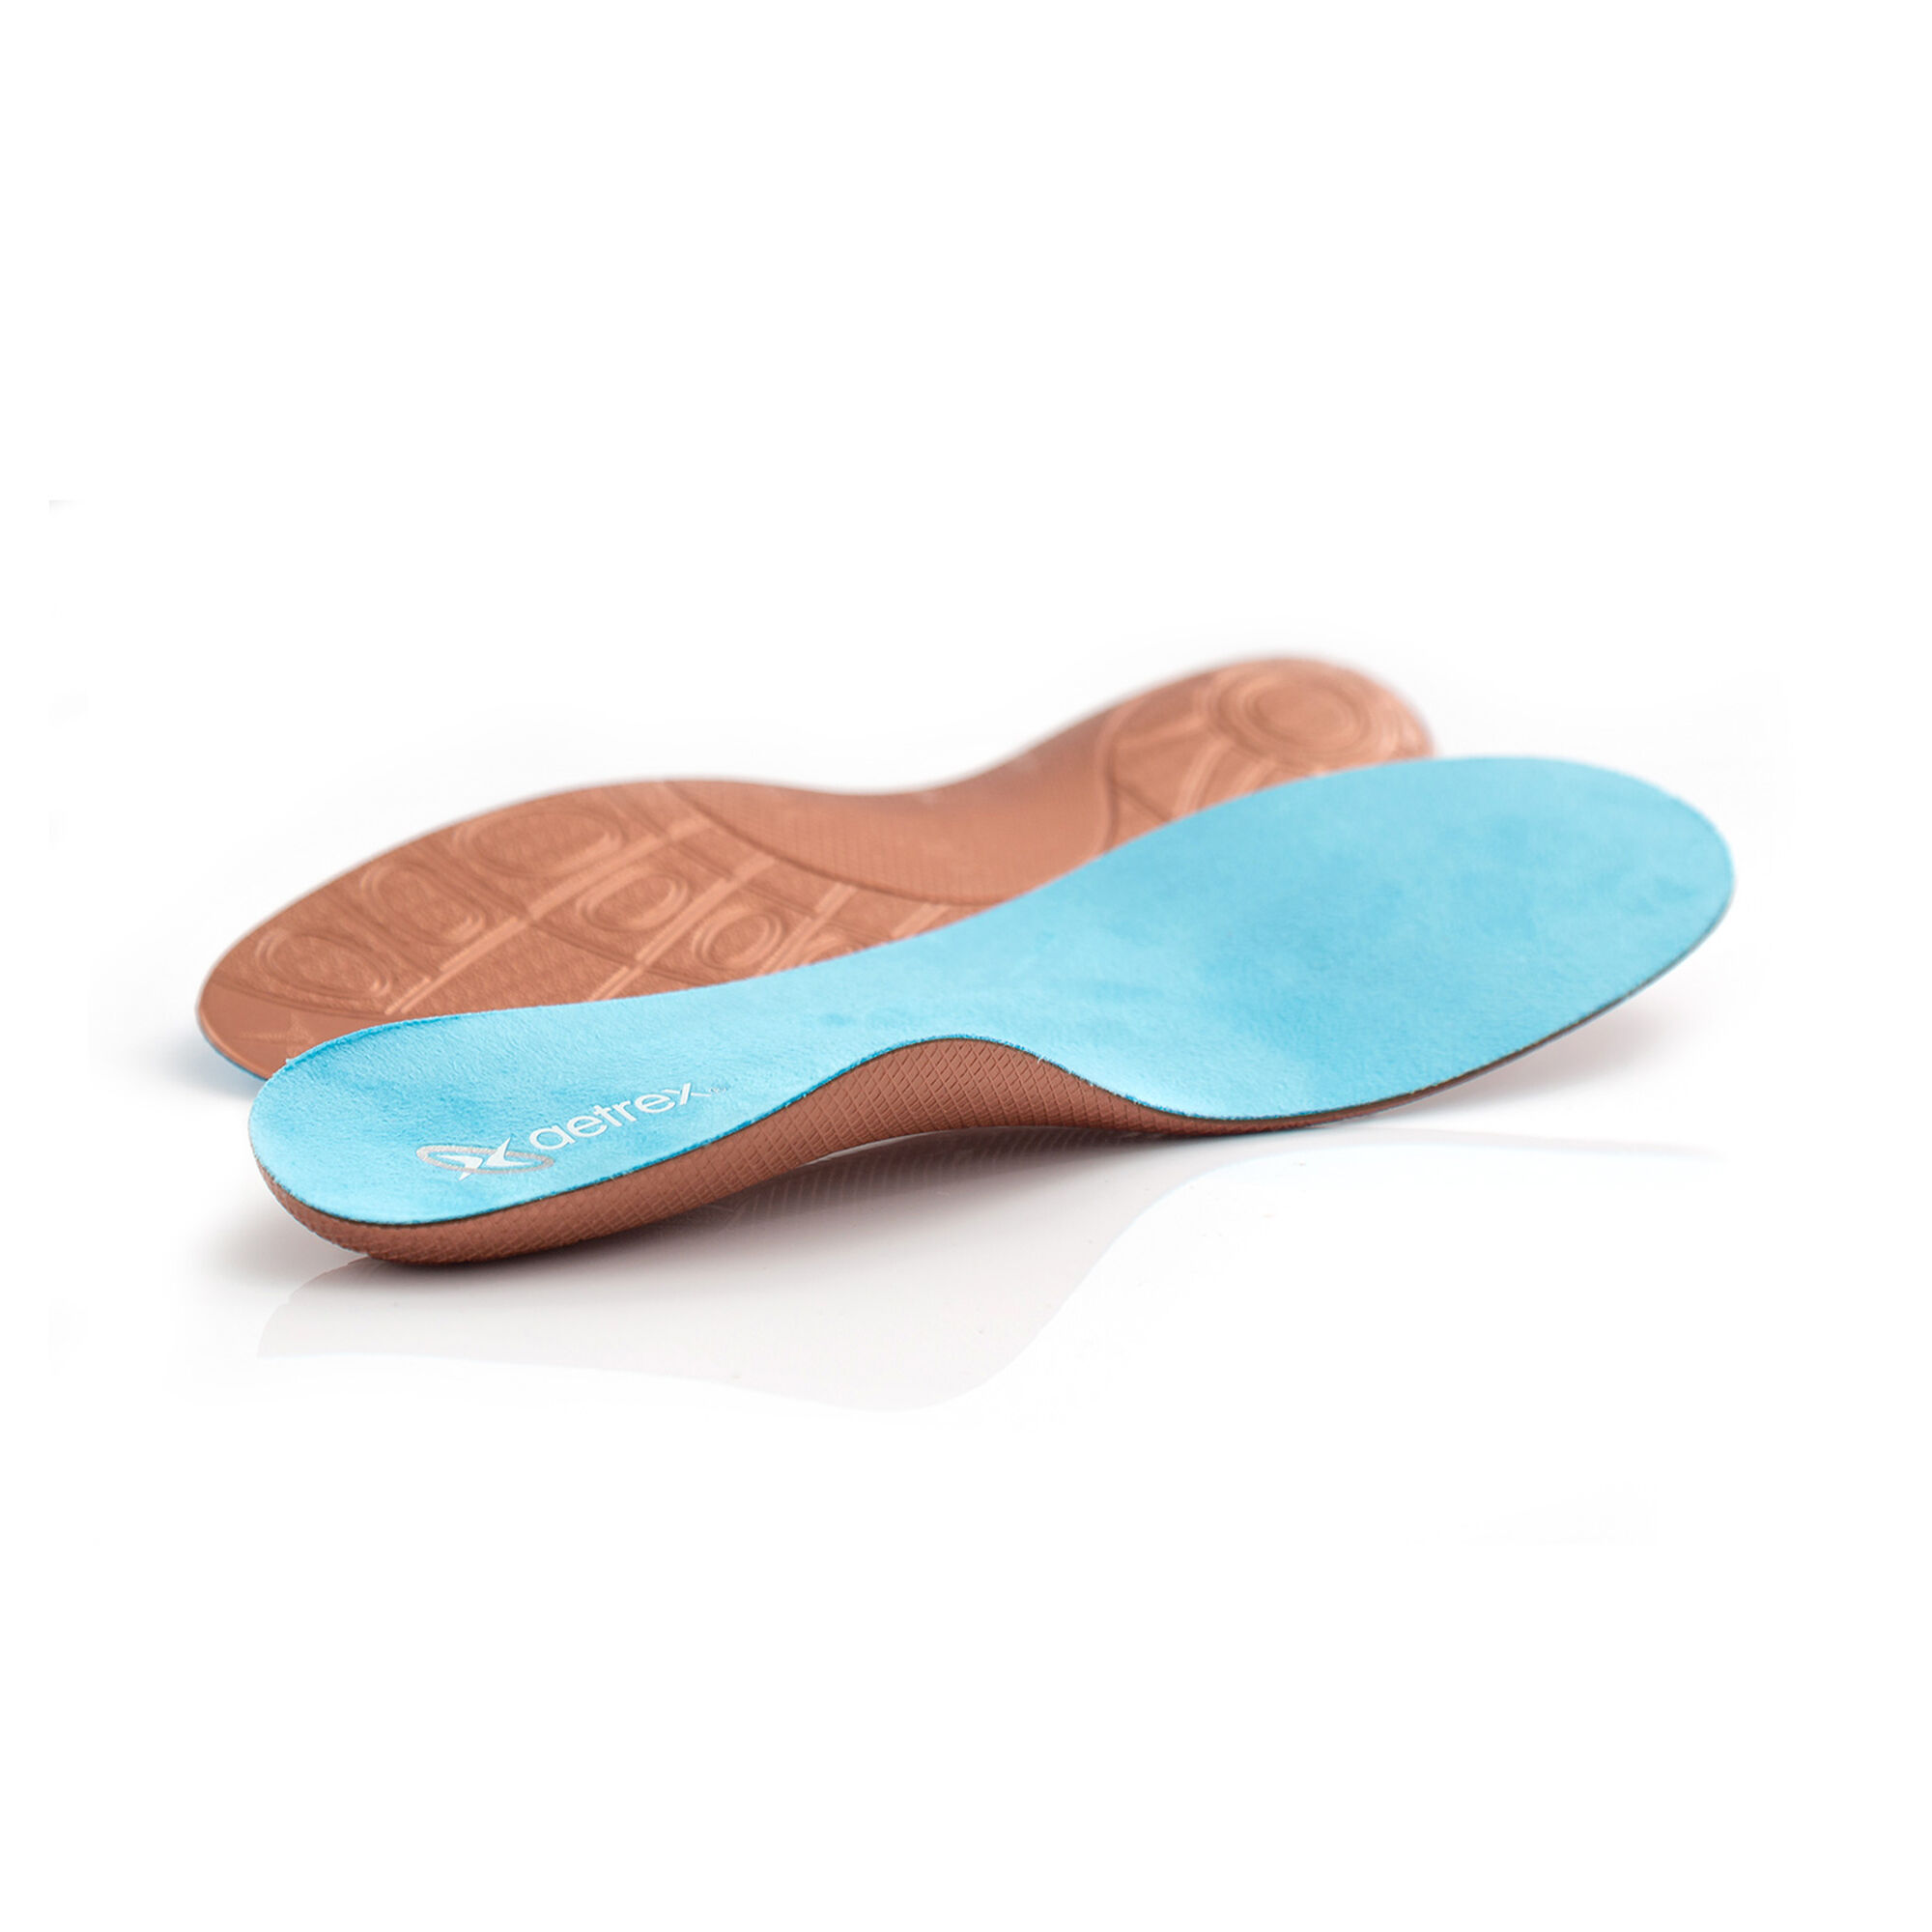 women's shoes with removable insoles for orthotics